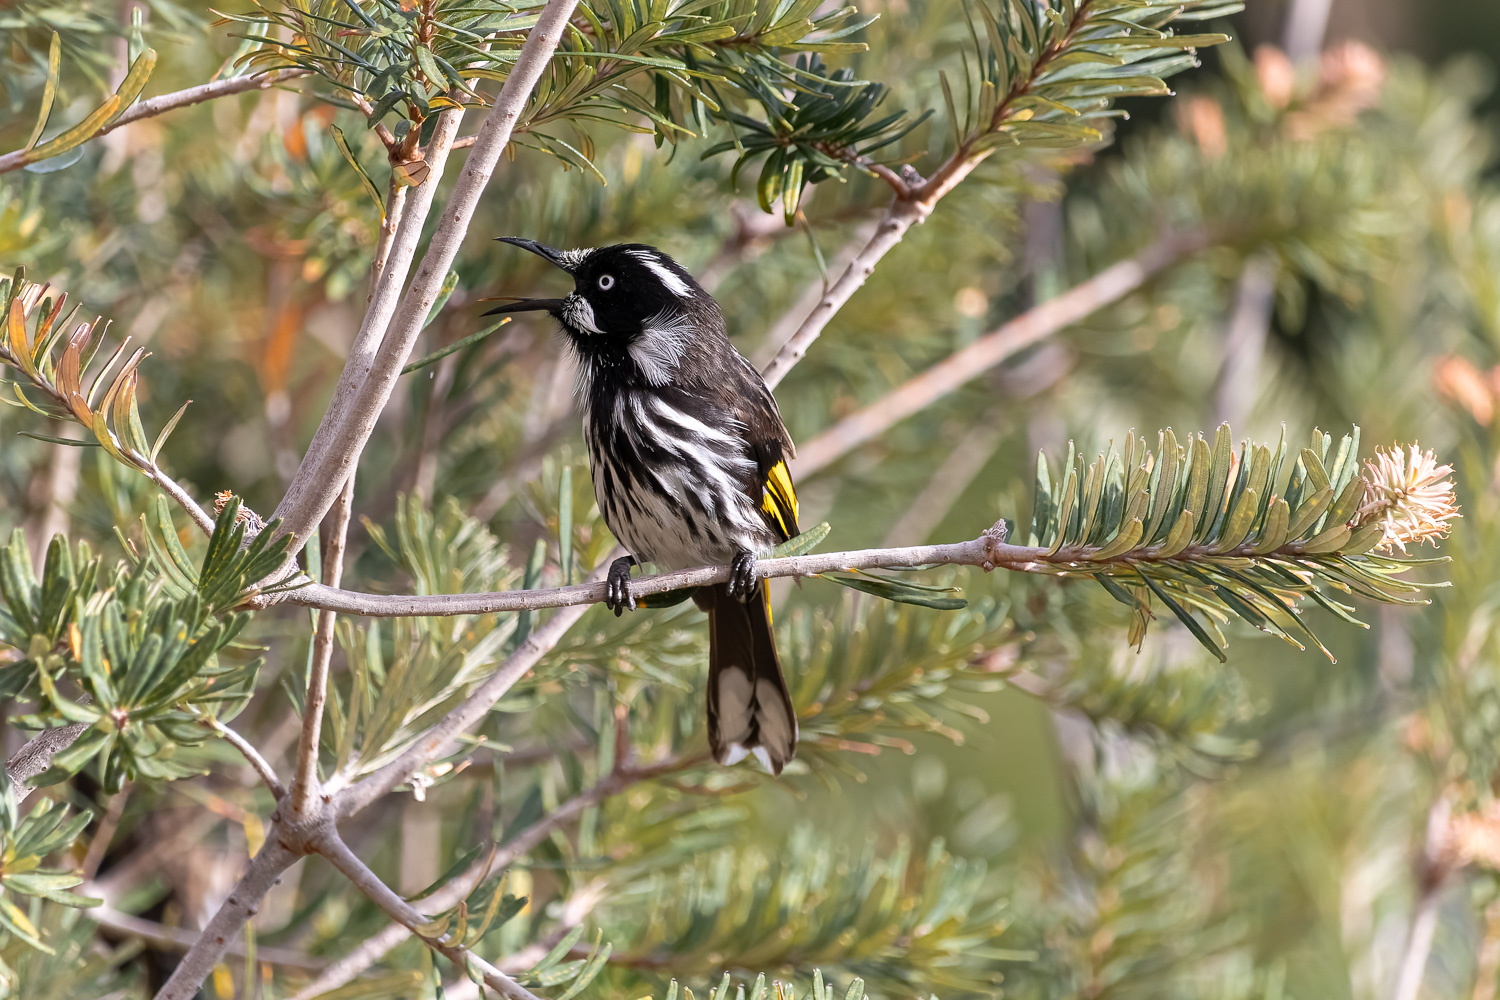 A small black and white bird with yellow on its wings, perched on a tree. Its long beak is open as it sings